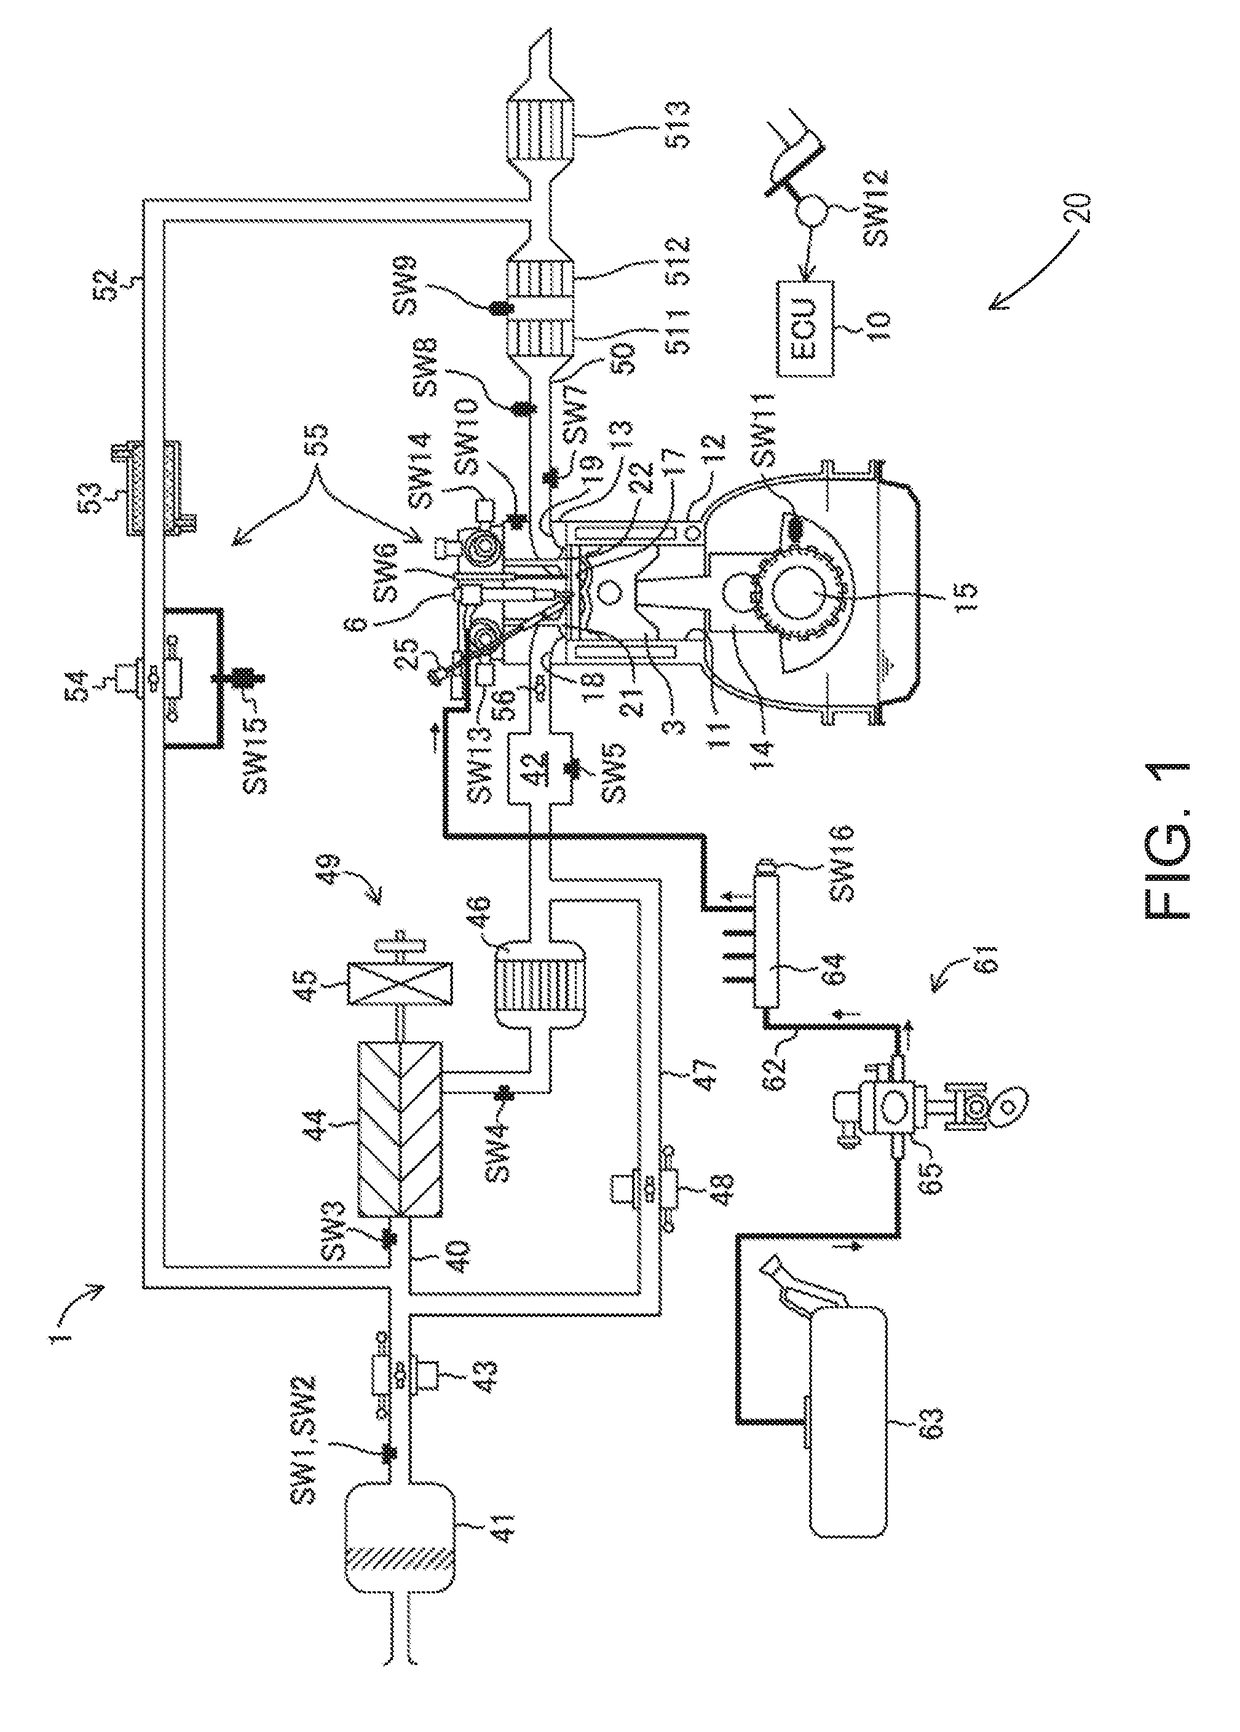 Control system for pre-mixture compression-ignition engine